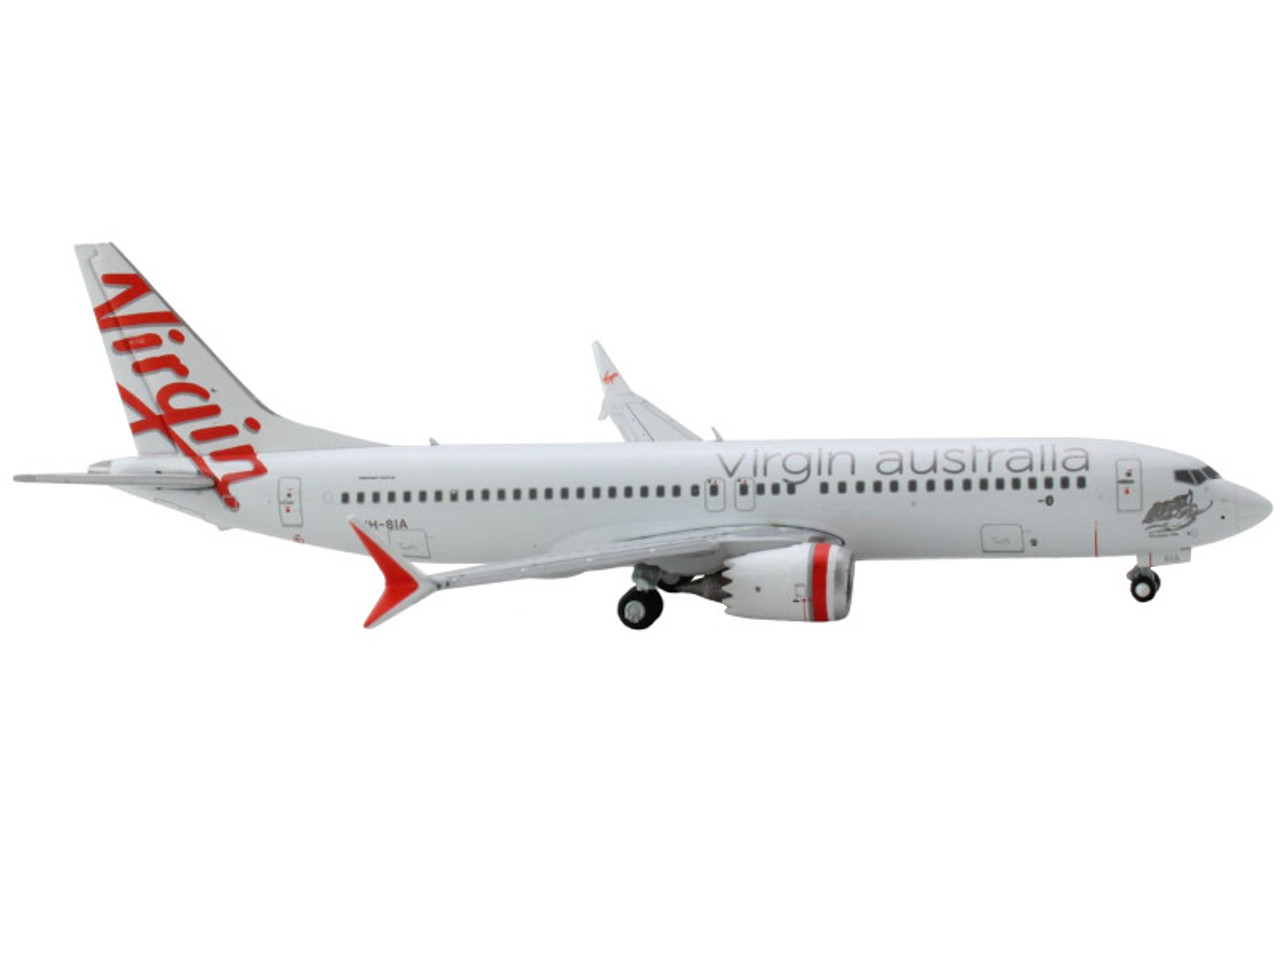 Boeing 737 MAX 8 Commercial Aircraft "Virgin Australia" White with Red Tail Graphics 1/400 Diecast Model Airplane by GeminiJets